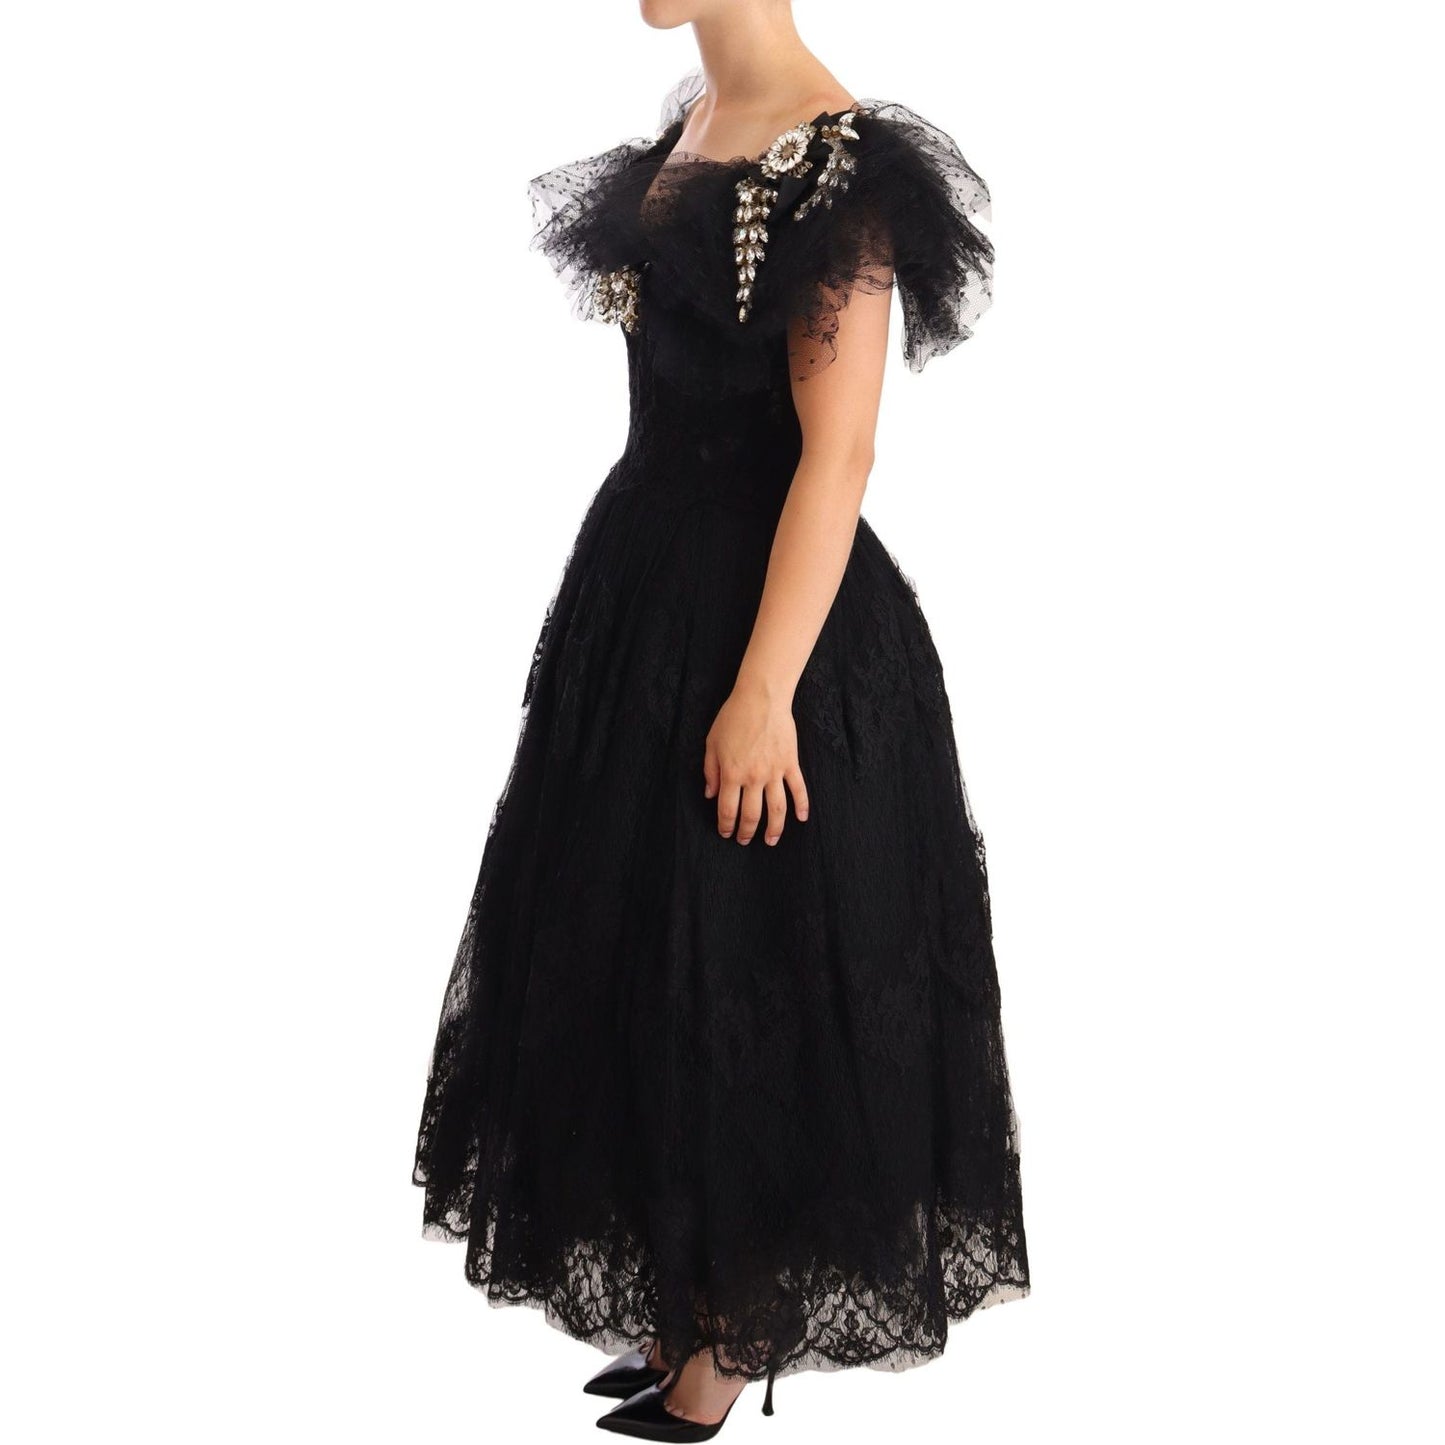 Dolce & Gabbana Crystal Embellished Black Ball Gown Dress WOMAN DRESSES black-floral-lace-crystal-ball-gown-dress